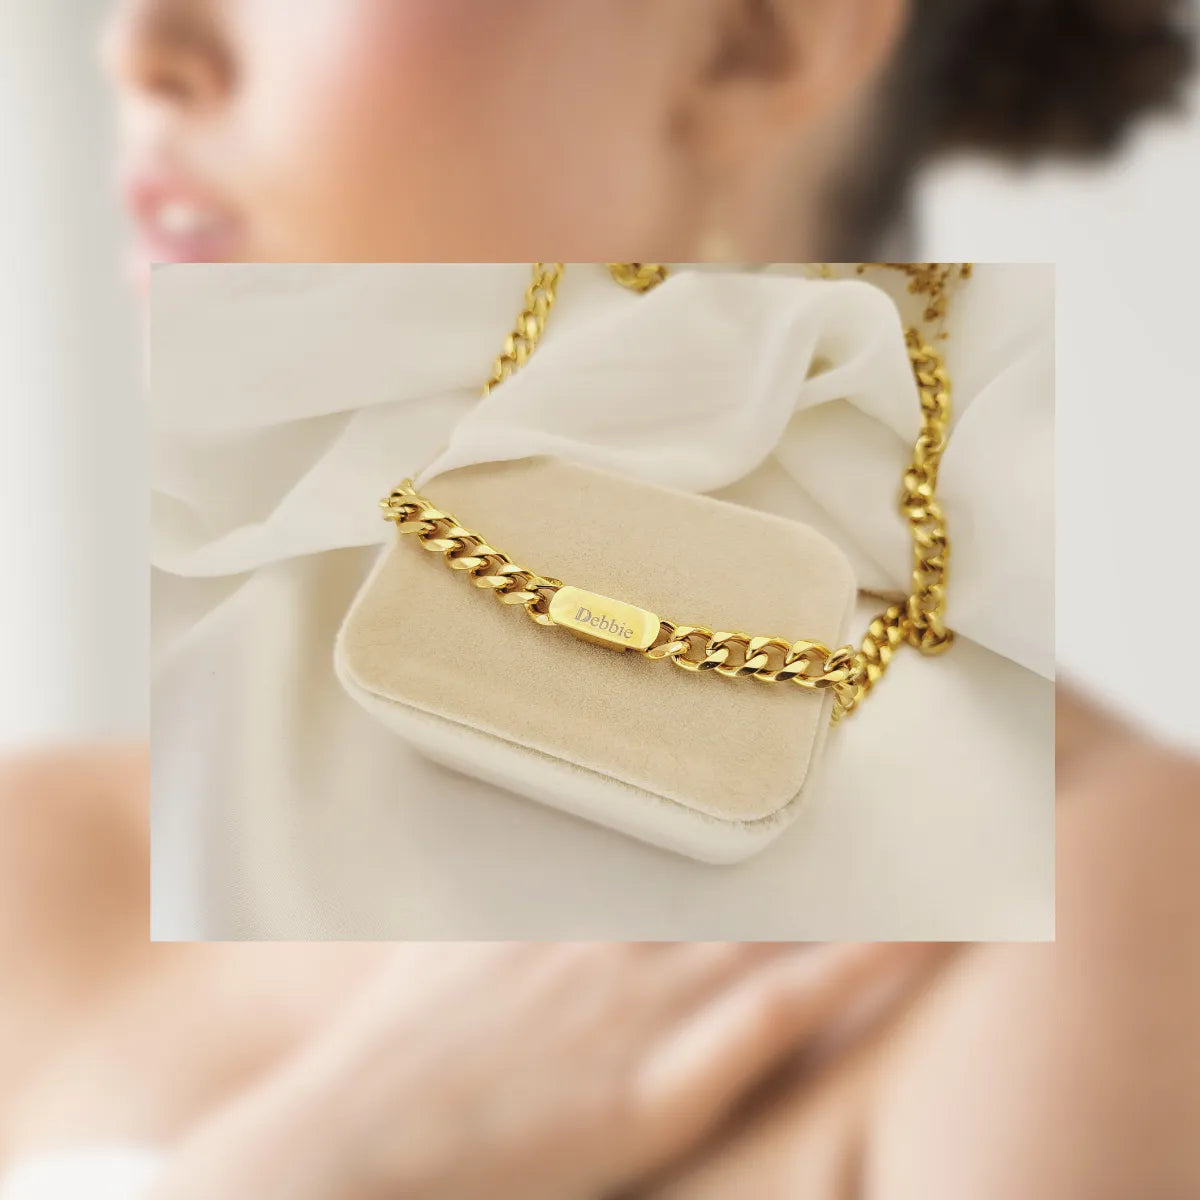 an image showing a customized piece of jewelry, with "Debbie" written on top of a gold label showcasing the customizability aspect of handmade jewelry. 